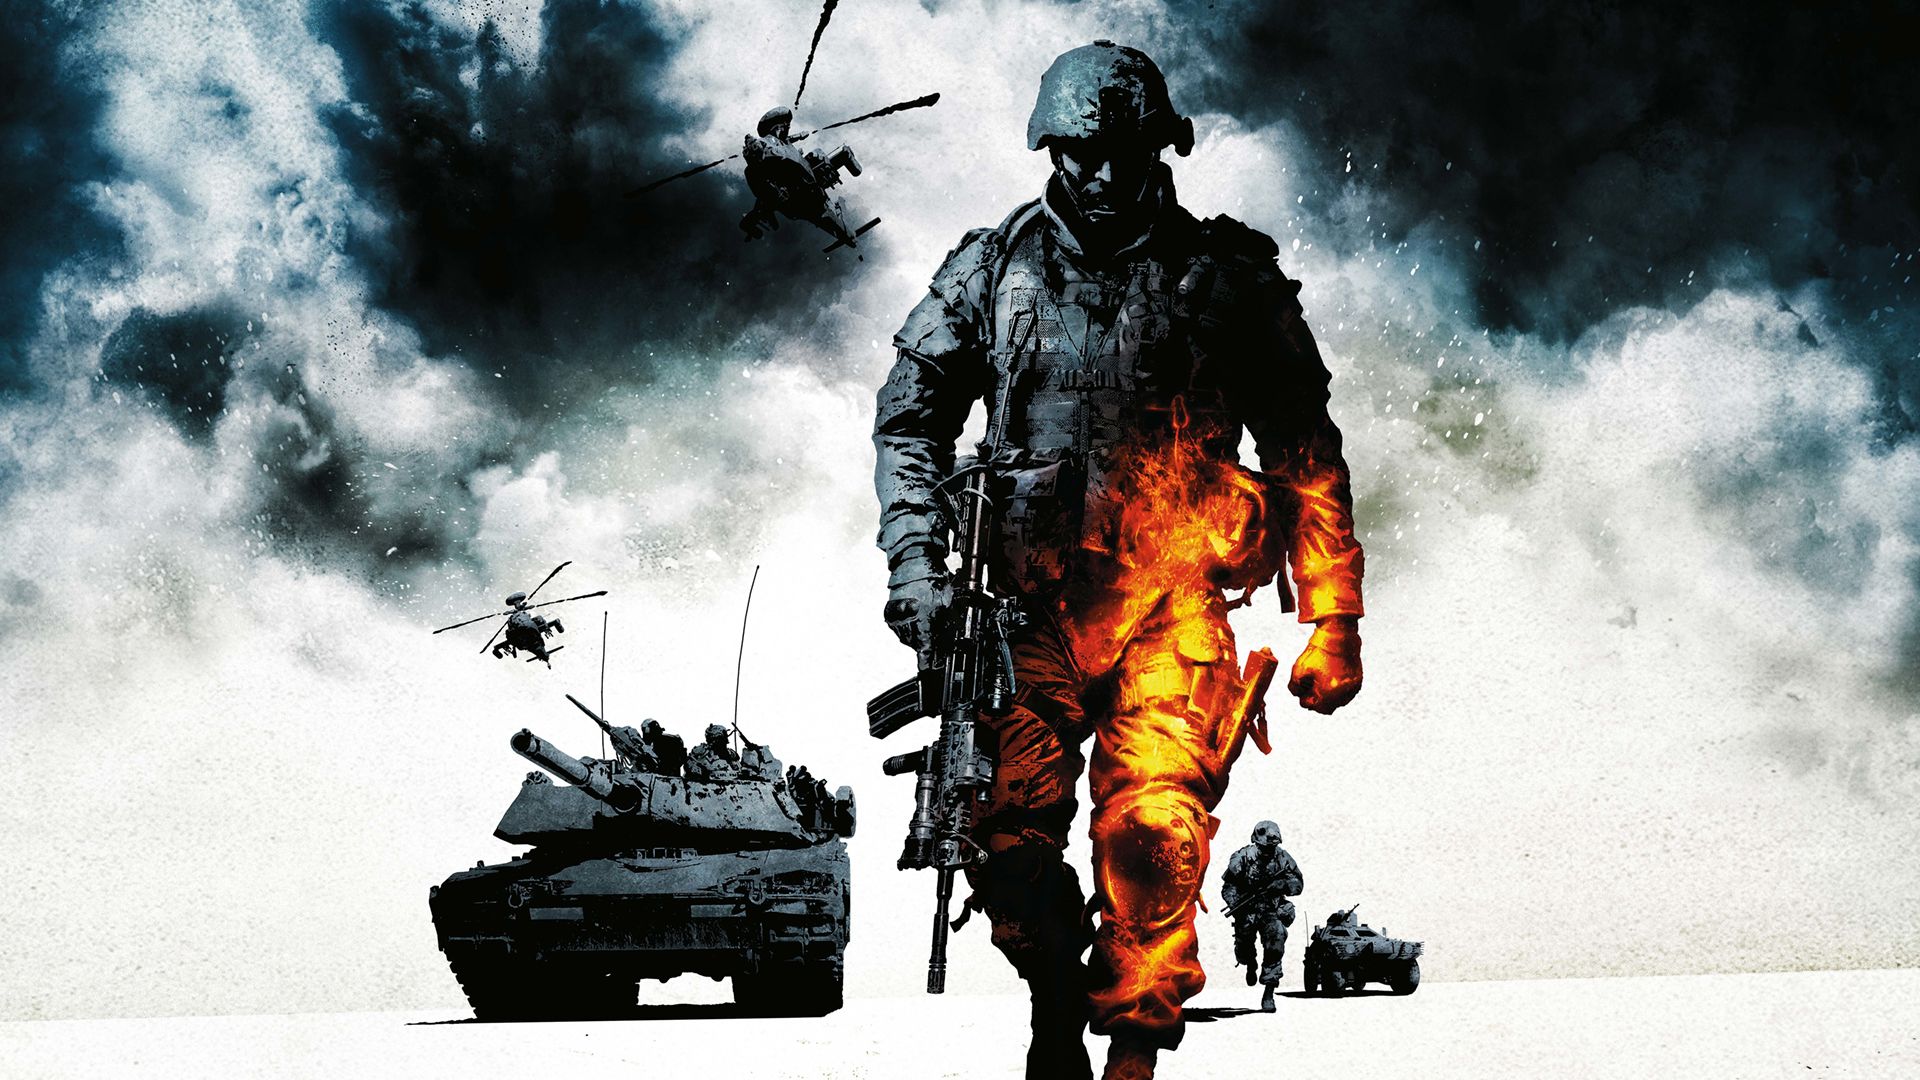 The Battlefield Series Peaked With Bad Company 2